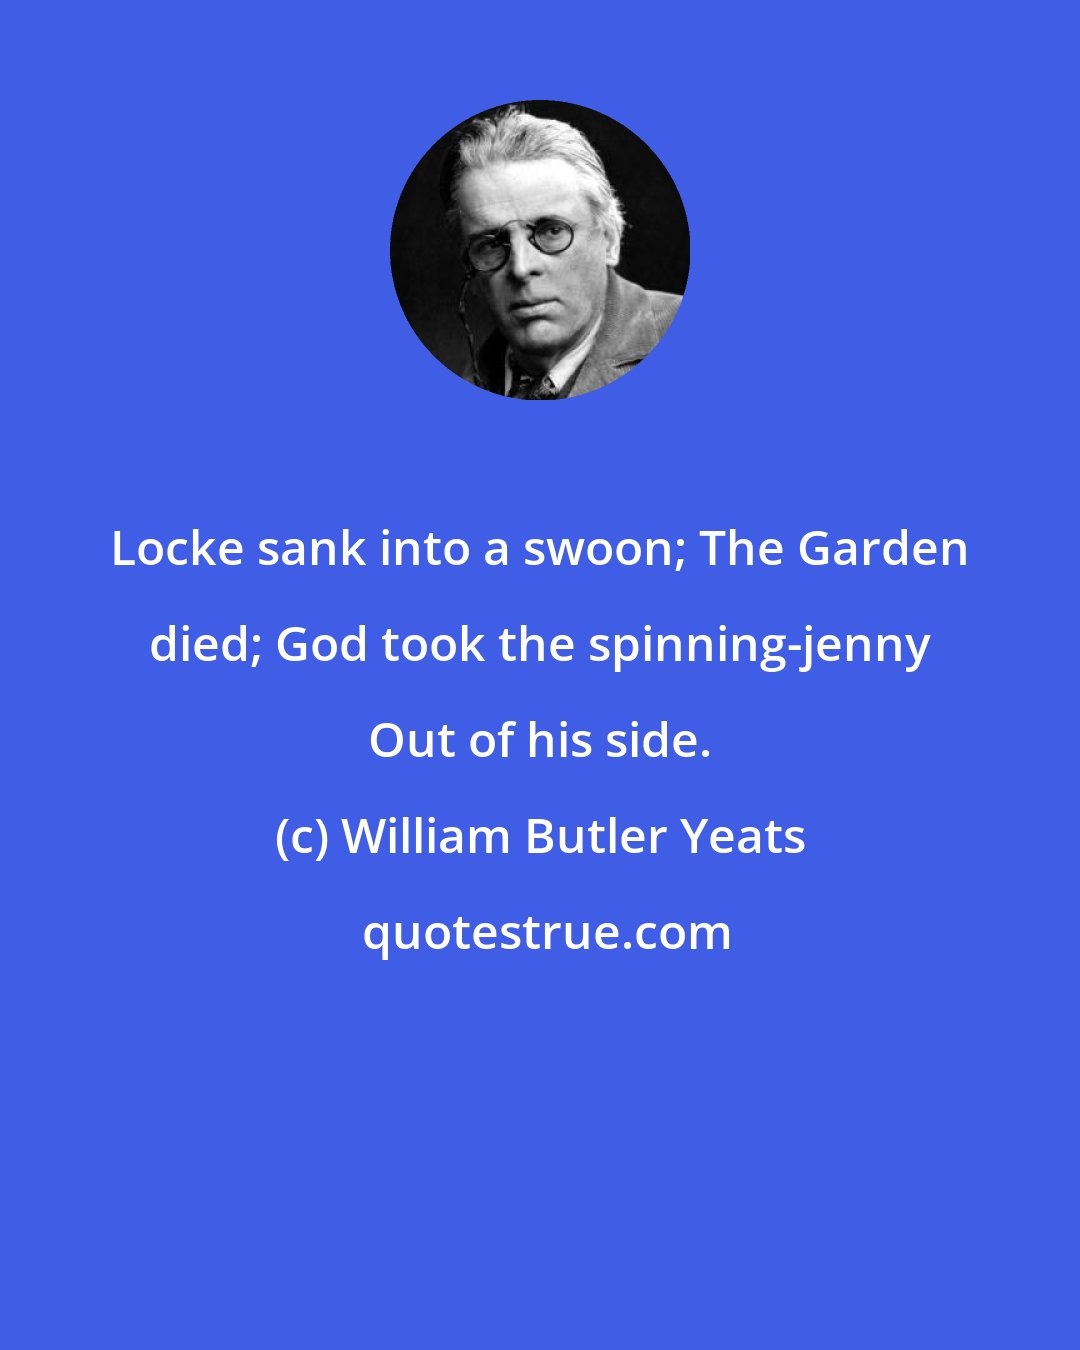 William Butler Yeats: Locke sank into a swoon; The Garden died; God took the spinning-jenny Out of his side.